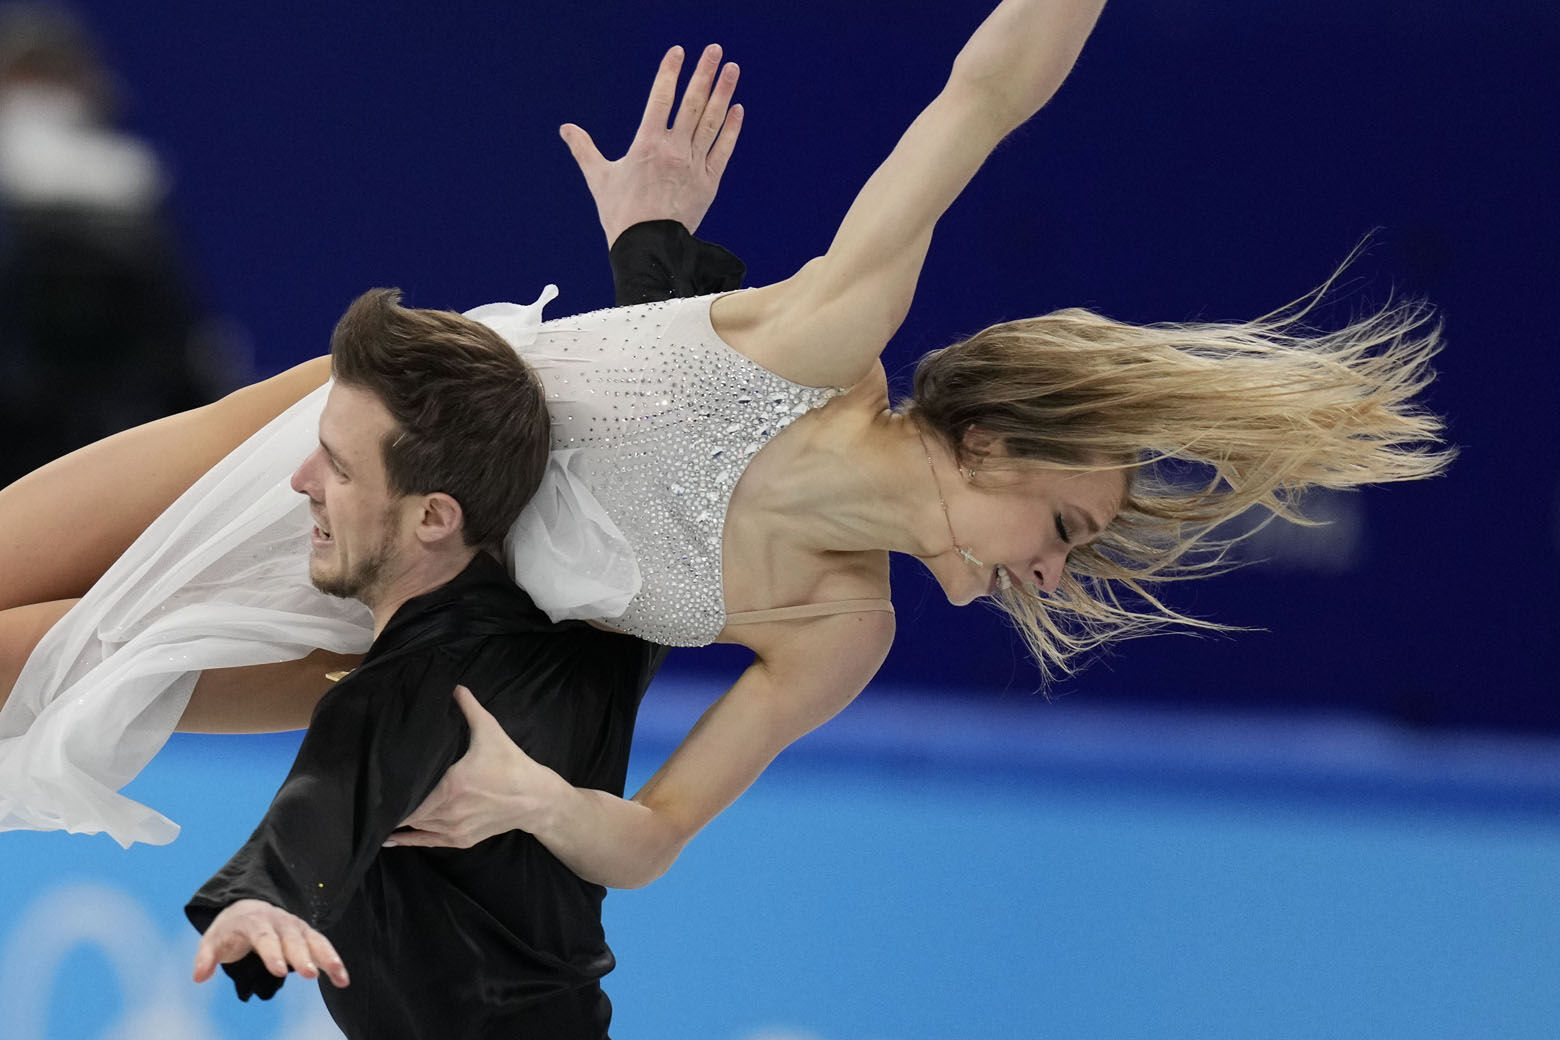 <p>Victoria Sinitsina and Nikita Katsalapov, of the Russian Olympic Committee, perform their routine in the ice dance competition during the figure skating at the 2022 Winter Olympics, Monday, Feb. 14, 2022, in Beijing.</p>
